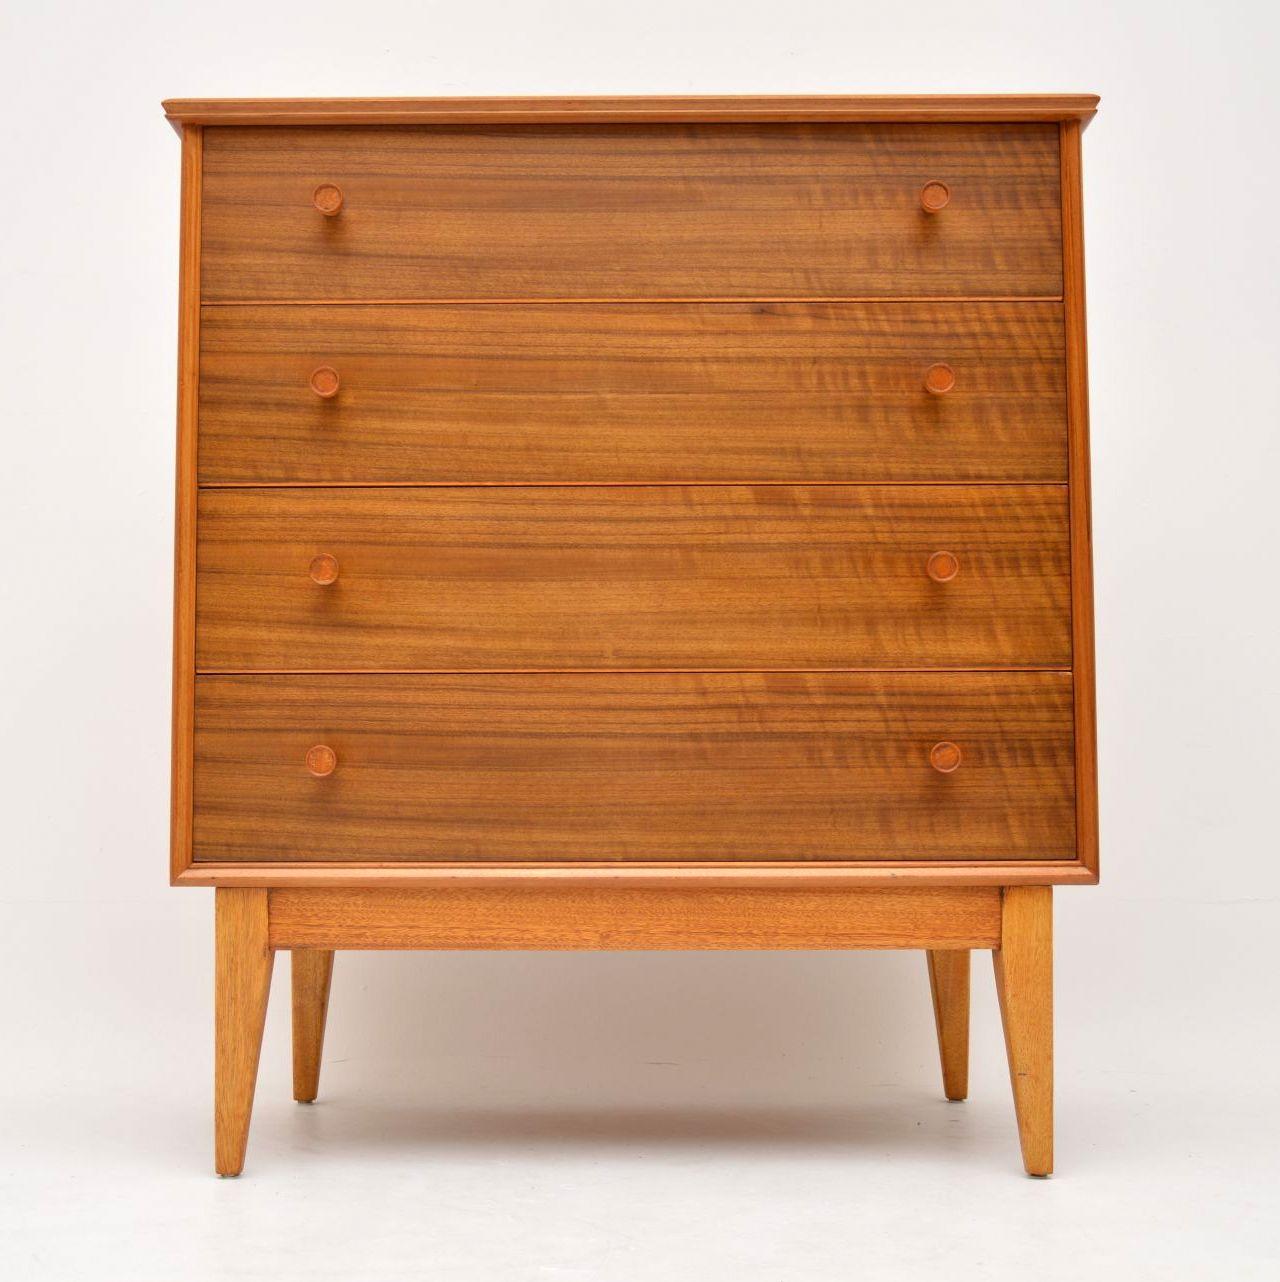 A smart, stylish and extremely well made vintage chest of drawers in walnut by the high end manufacturer Alfred Cox. This dates from the 1950s-1960s, we have had it completely stripped and re-polished to a very high standard, the condition is superb